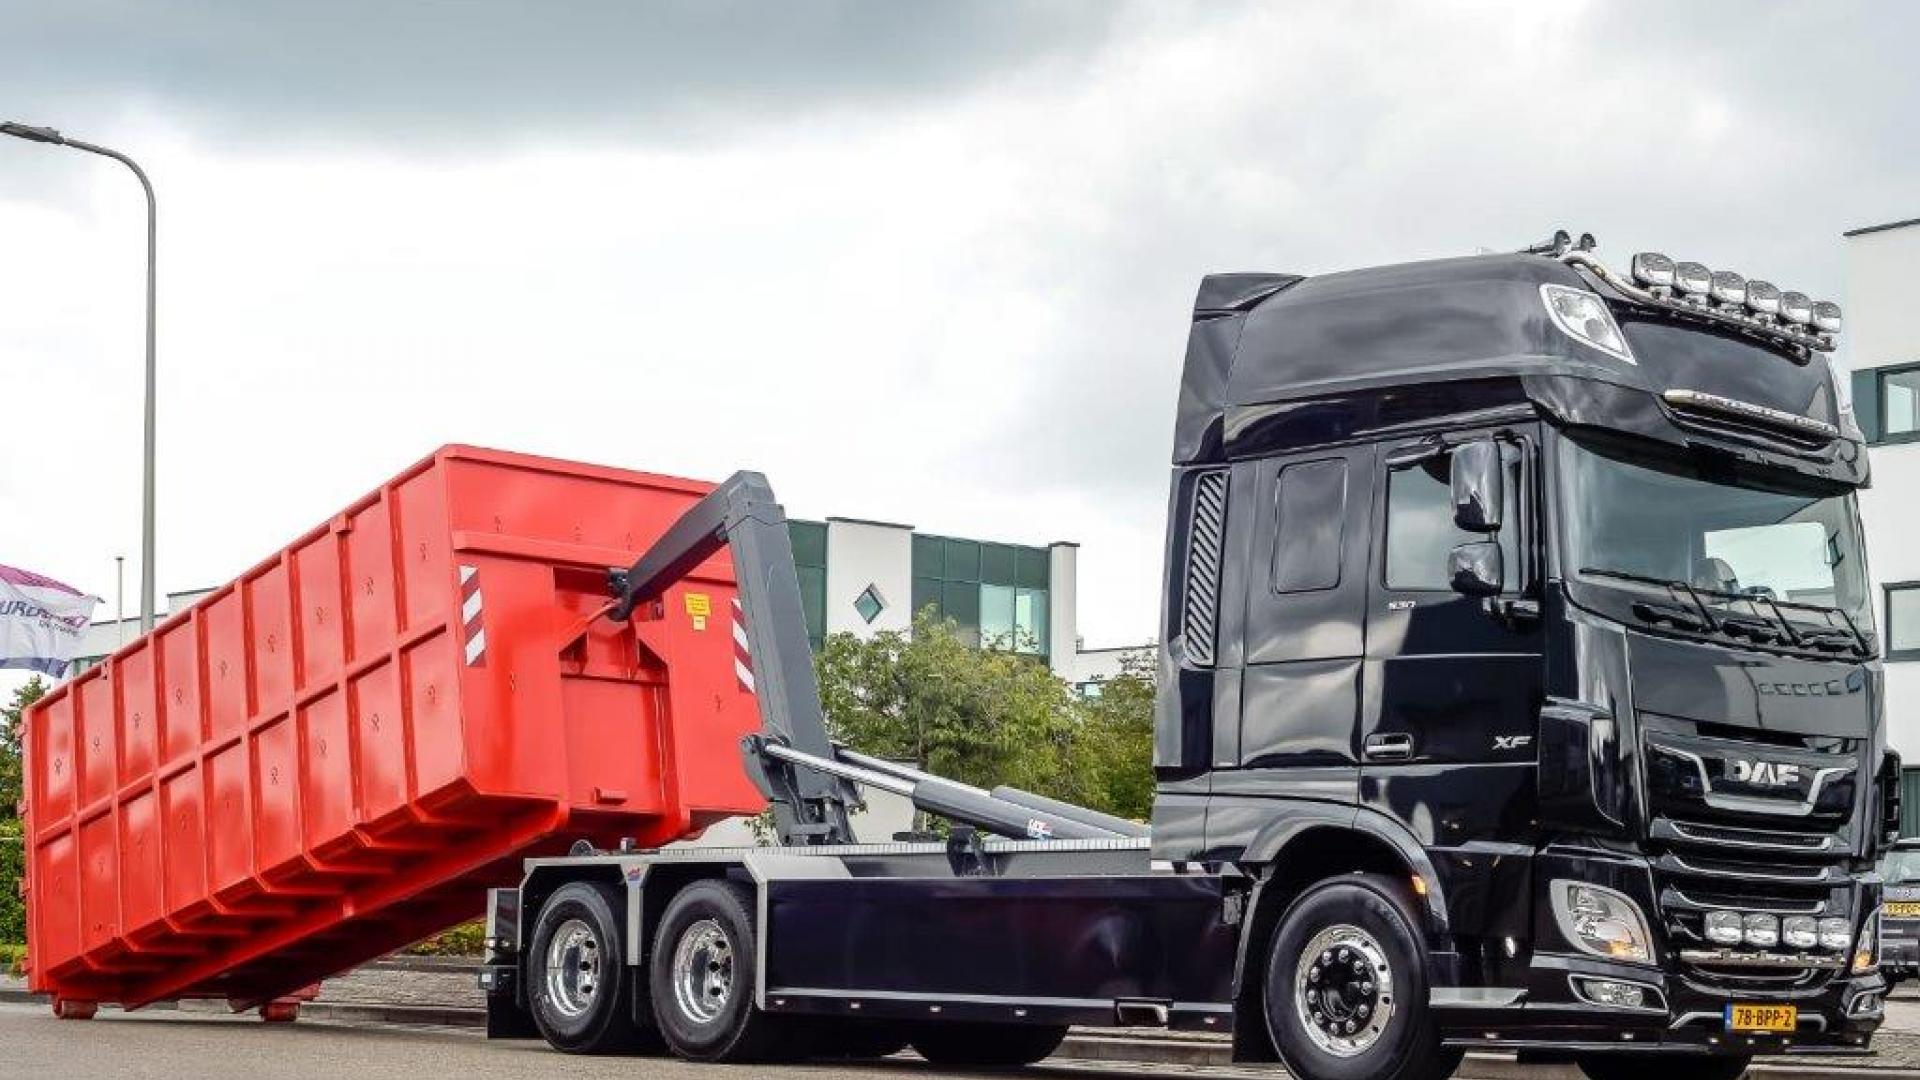 What an eye-catcher this downright brilliant hooklift truck is!